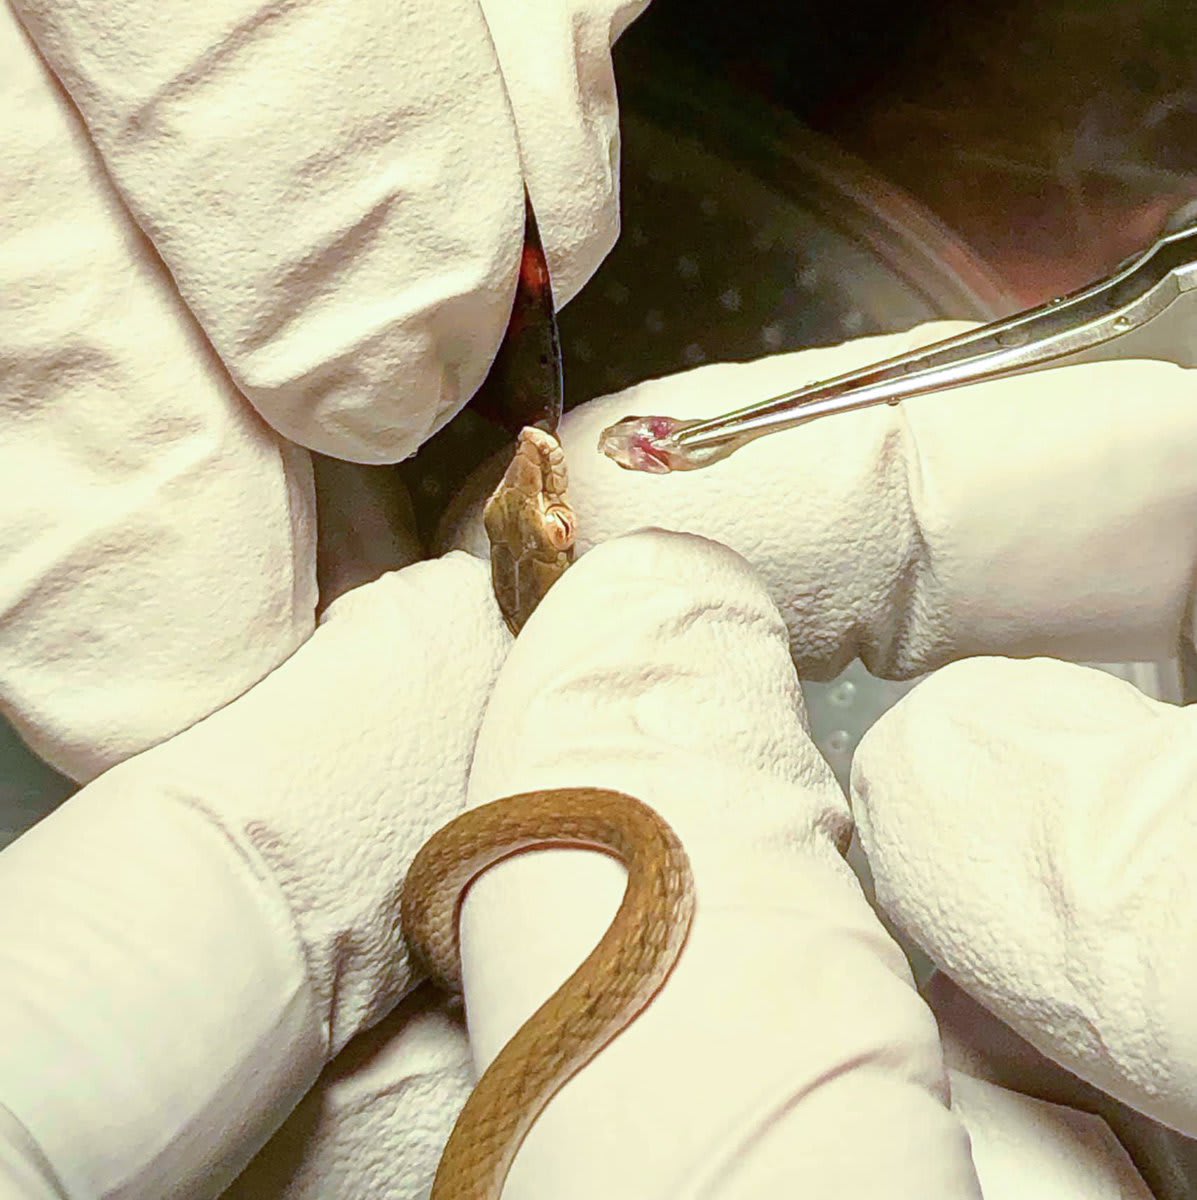 When a clutch of baby Burmese vine snakes needed a little help figuring out how to catch their own fish, our biologists & Animal Health staff were there—with teeny, tiny nurturing that helped the snakes become self-sufficient. / 📷 by biologist Molly H.